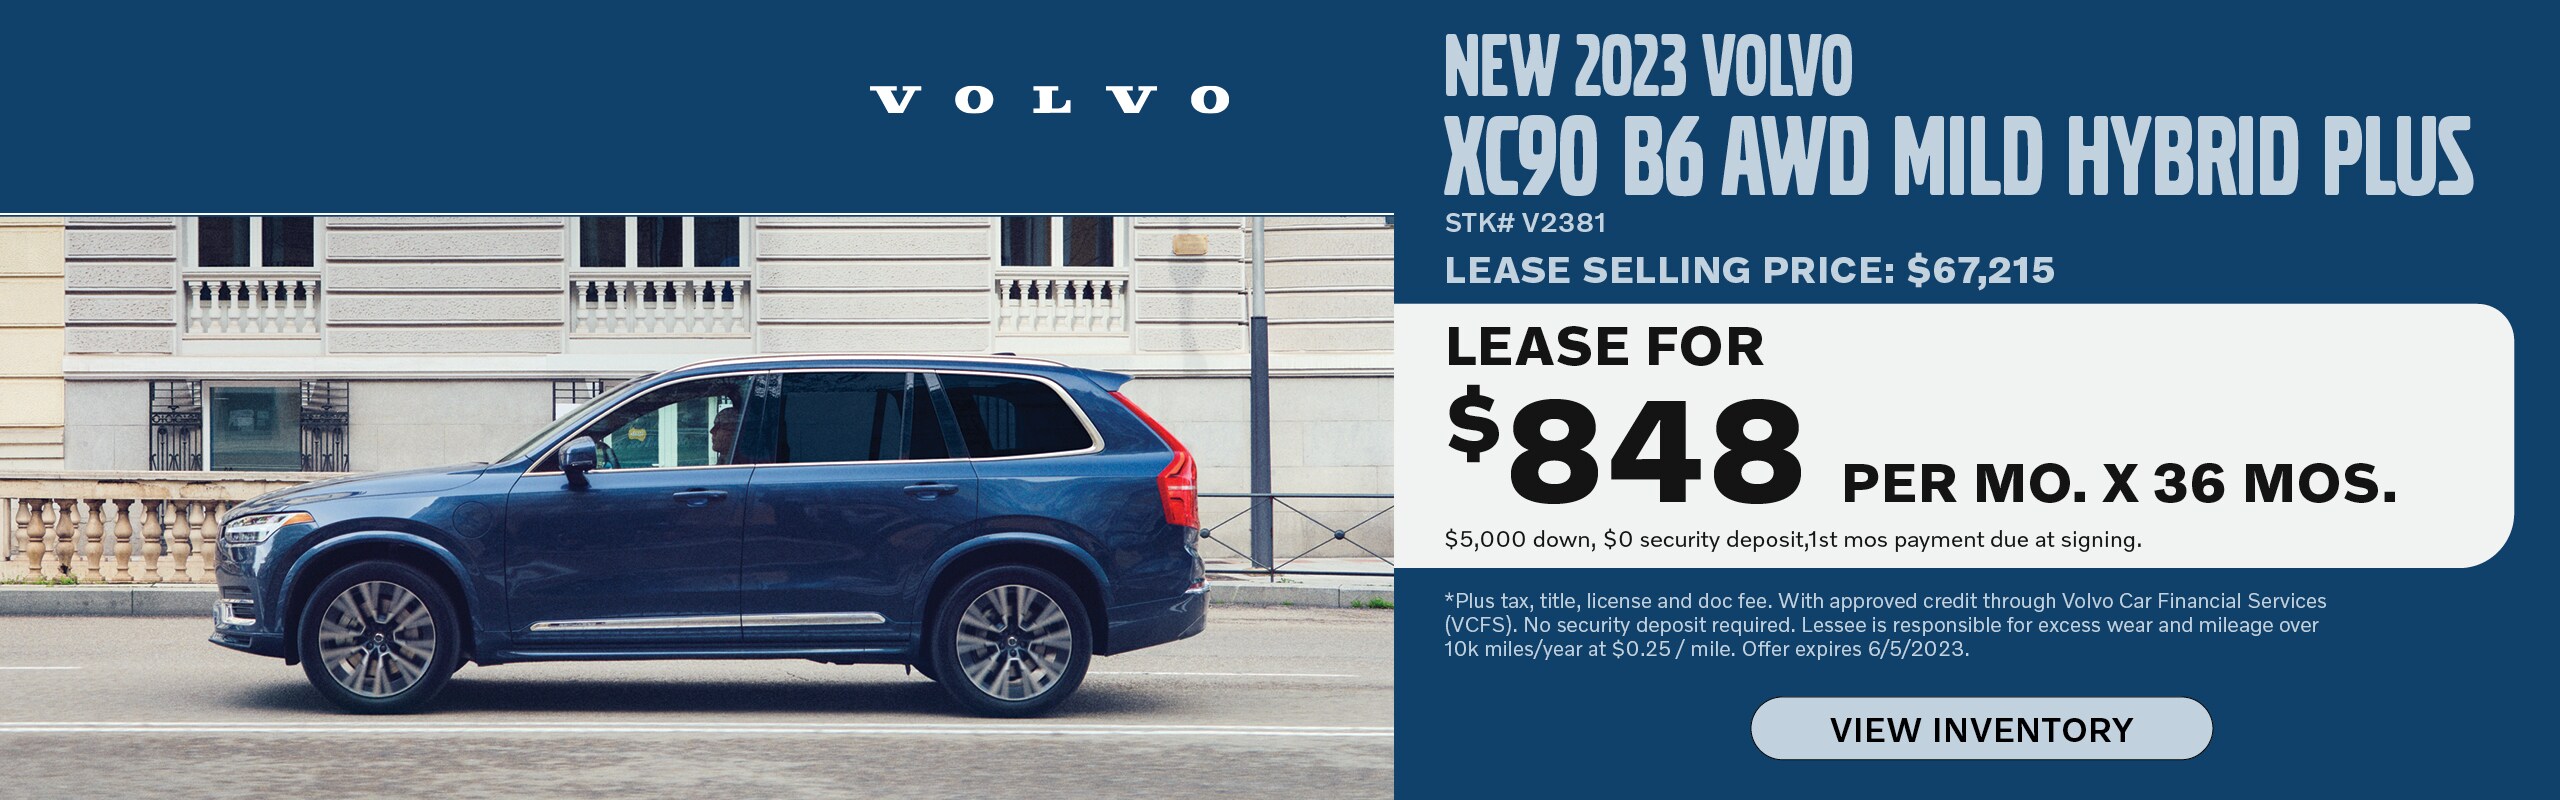 Lease a new 2023 Volvo XC90 B6 AWD Mild Hybrid Plus for $848 per month for 36 months. $5,000 down, $0 security deposit, 1st months payment due at signing. Stock number: V2381. Lease Selling Price: $67,215